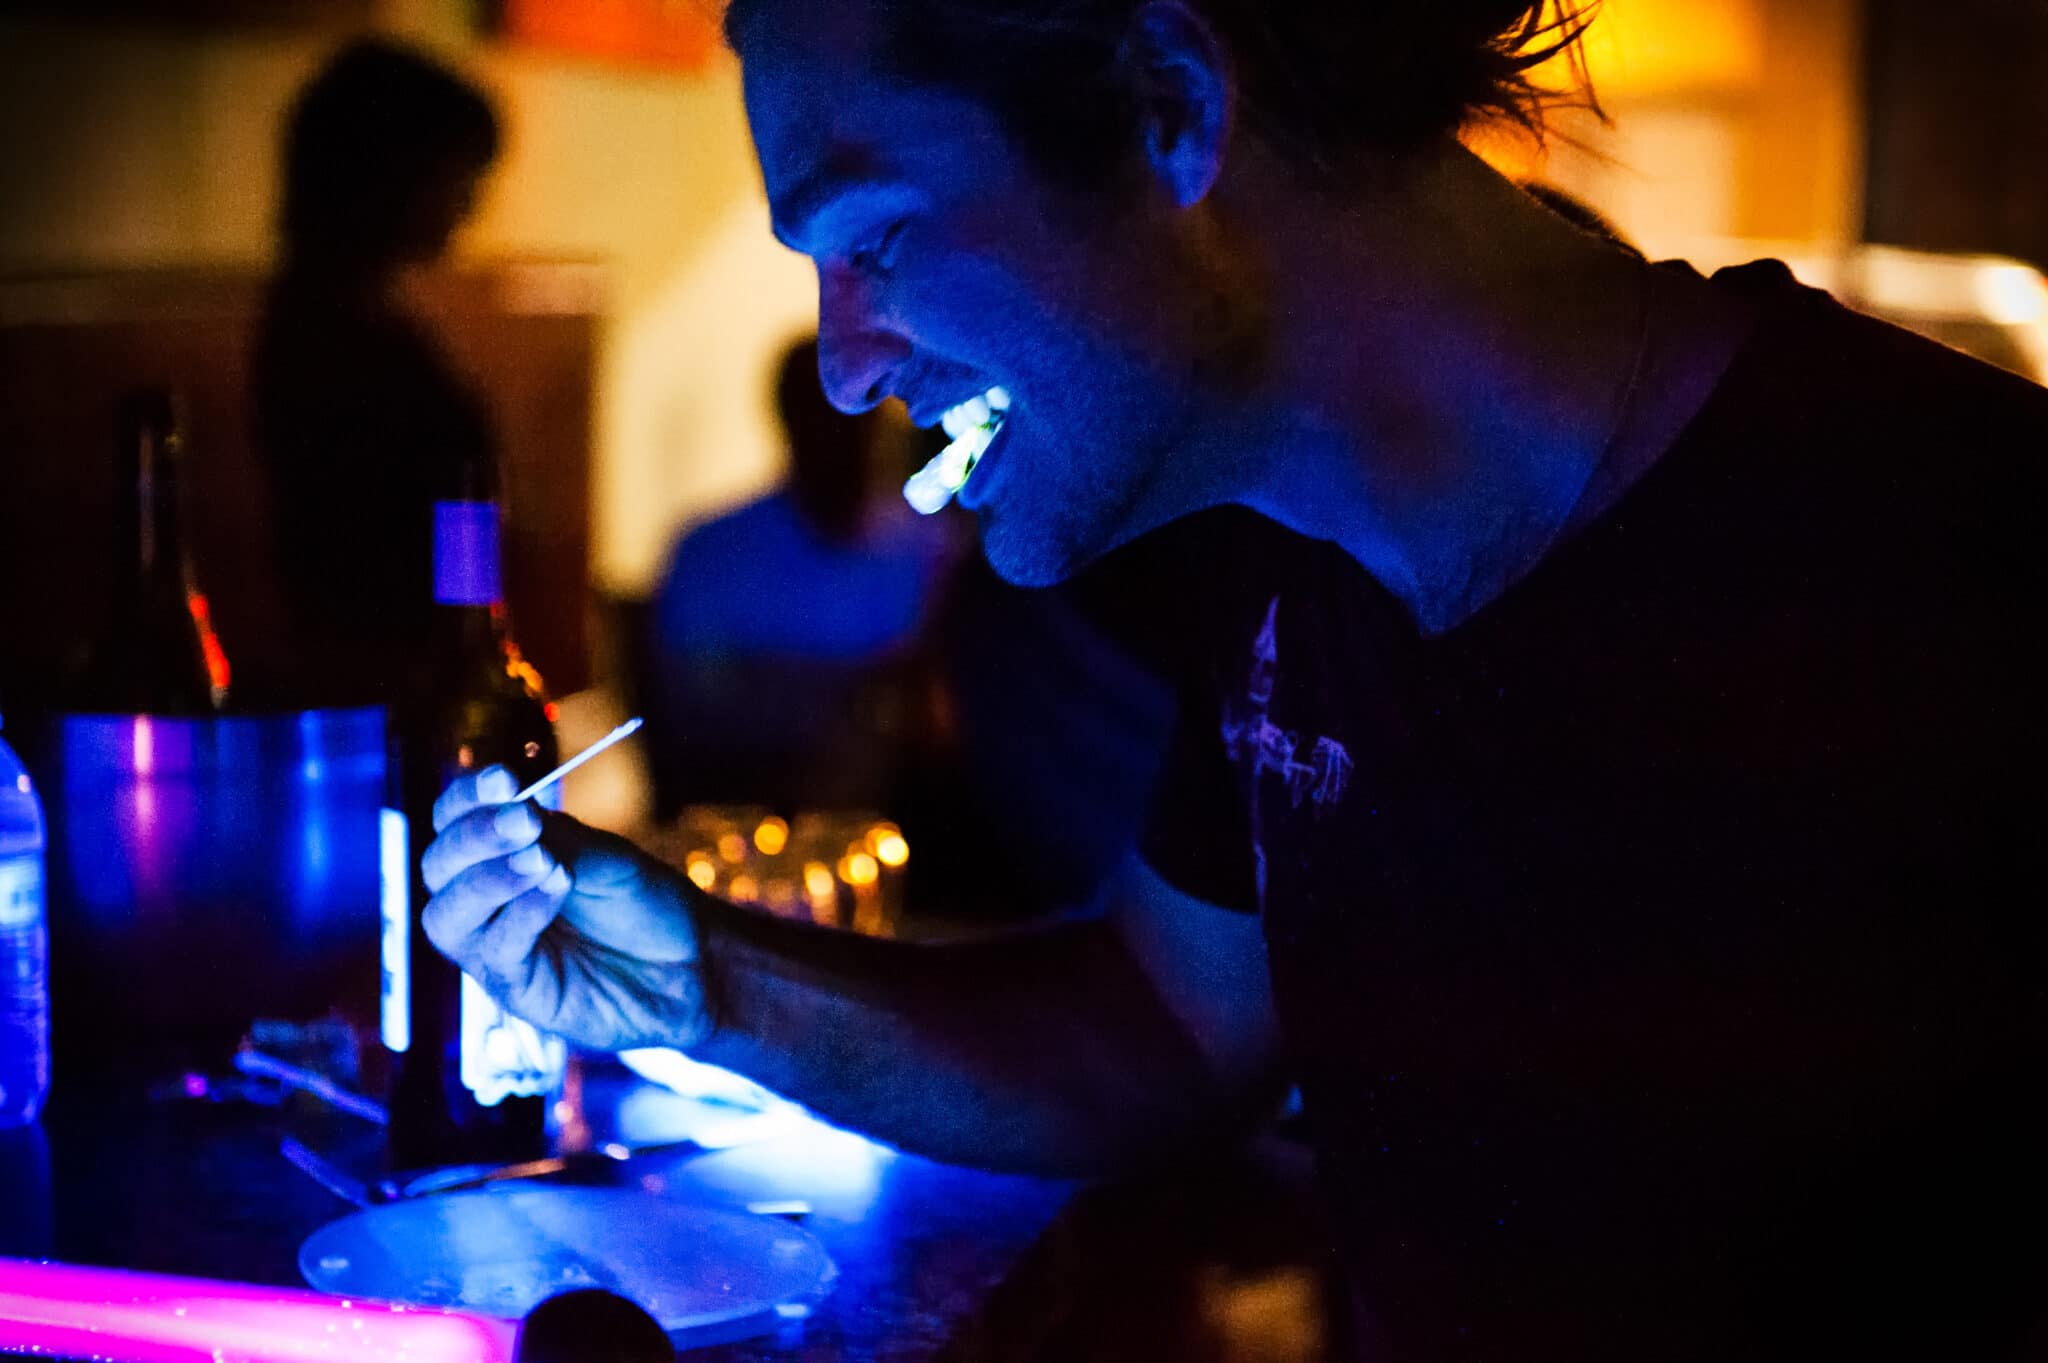 Black light illuminates a guest eating food designed to glow in that type of illumination at a restaurant pop-up event.